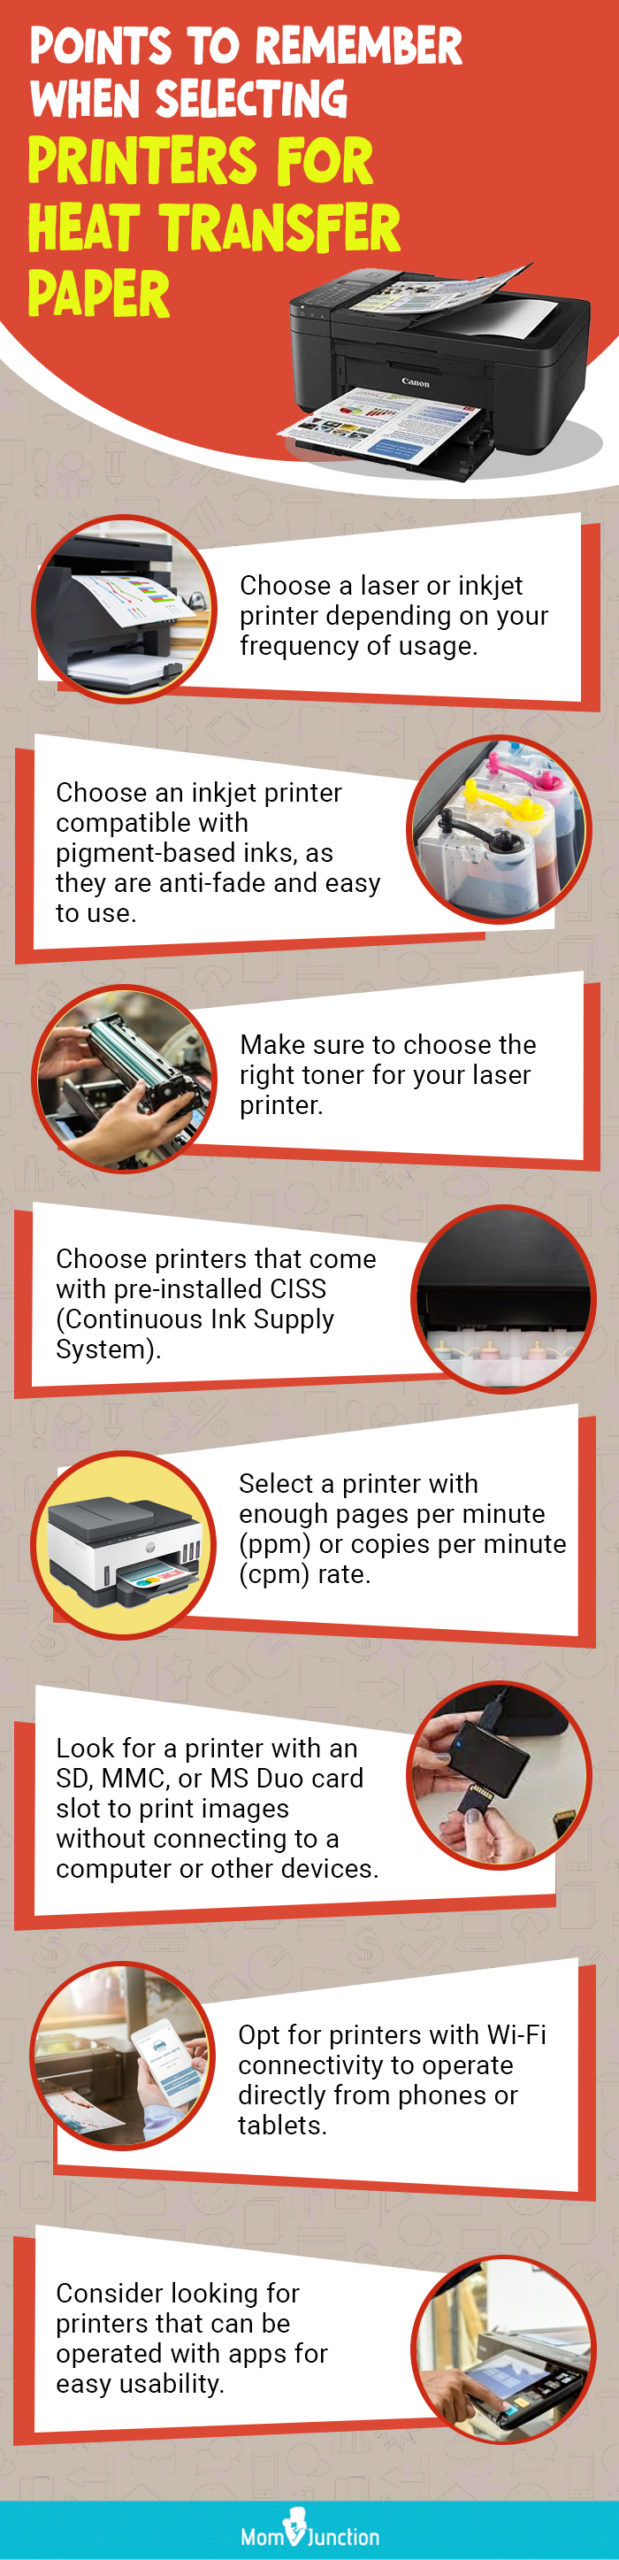 Points To Remember When Selecting Printers For Heat Transfer Paper (infographic)